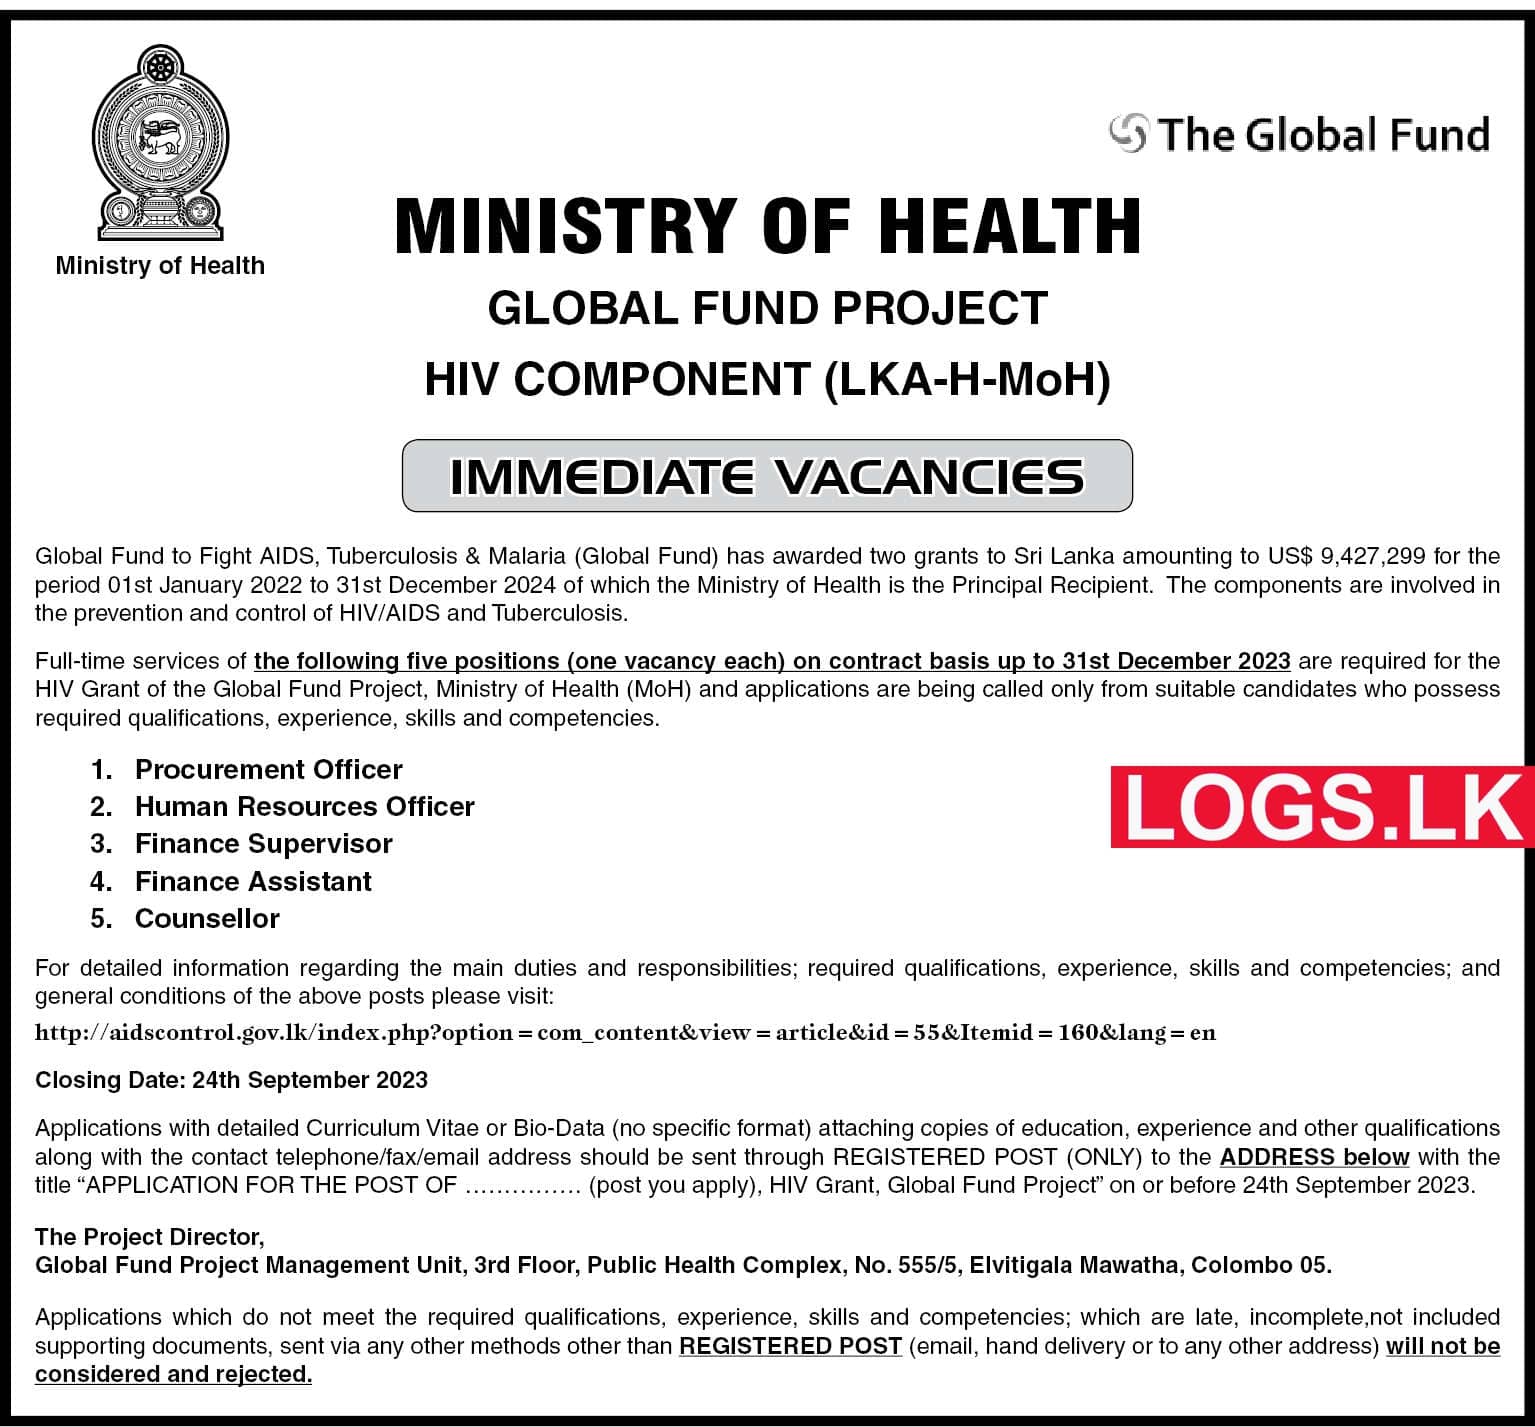 Ministry of Health Global Fund Project Job Vacancies 2023 Application Form